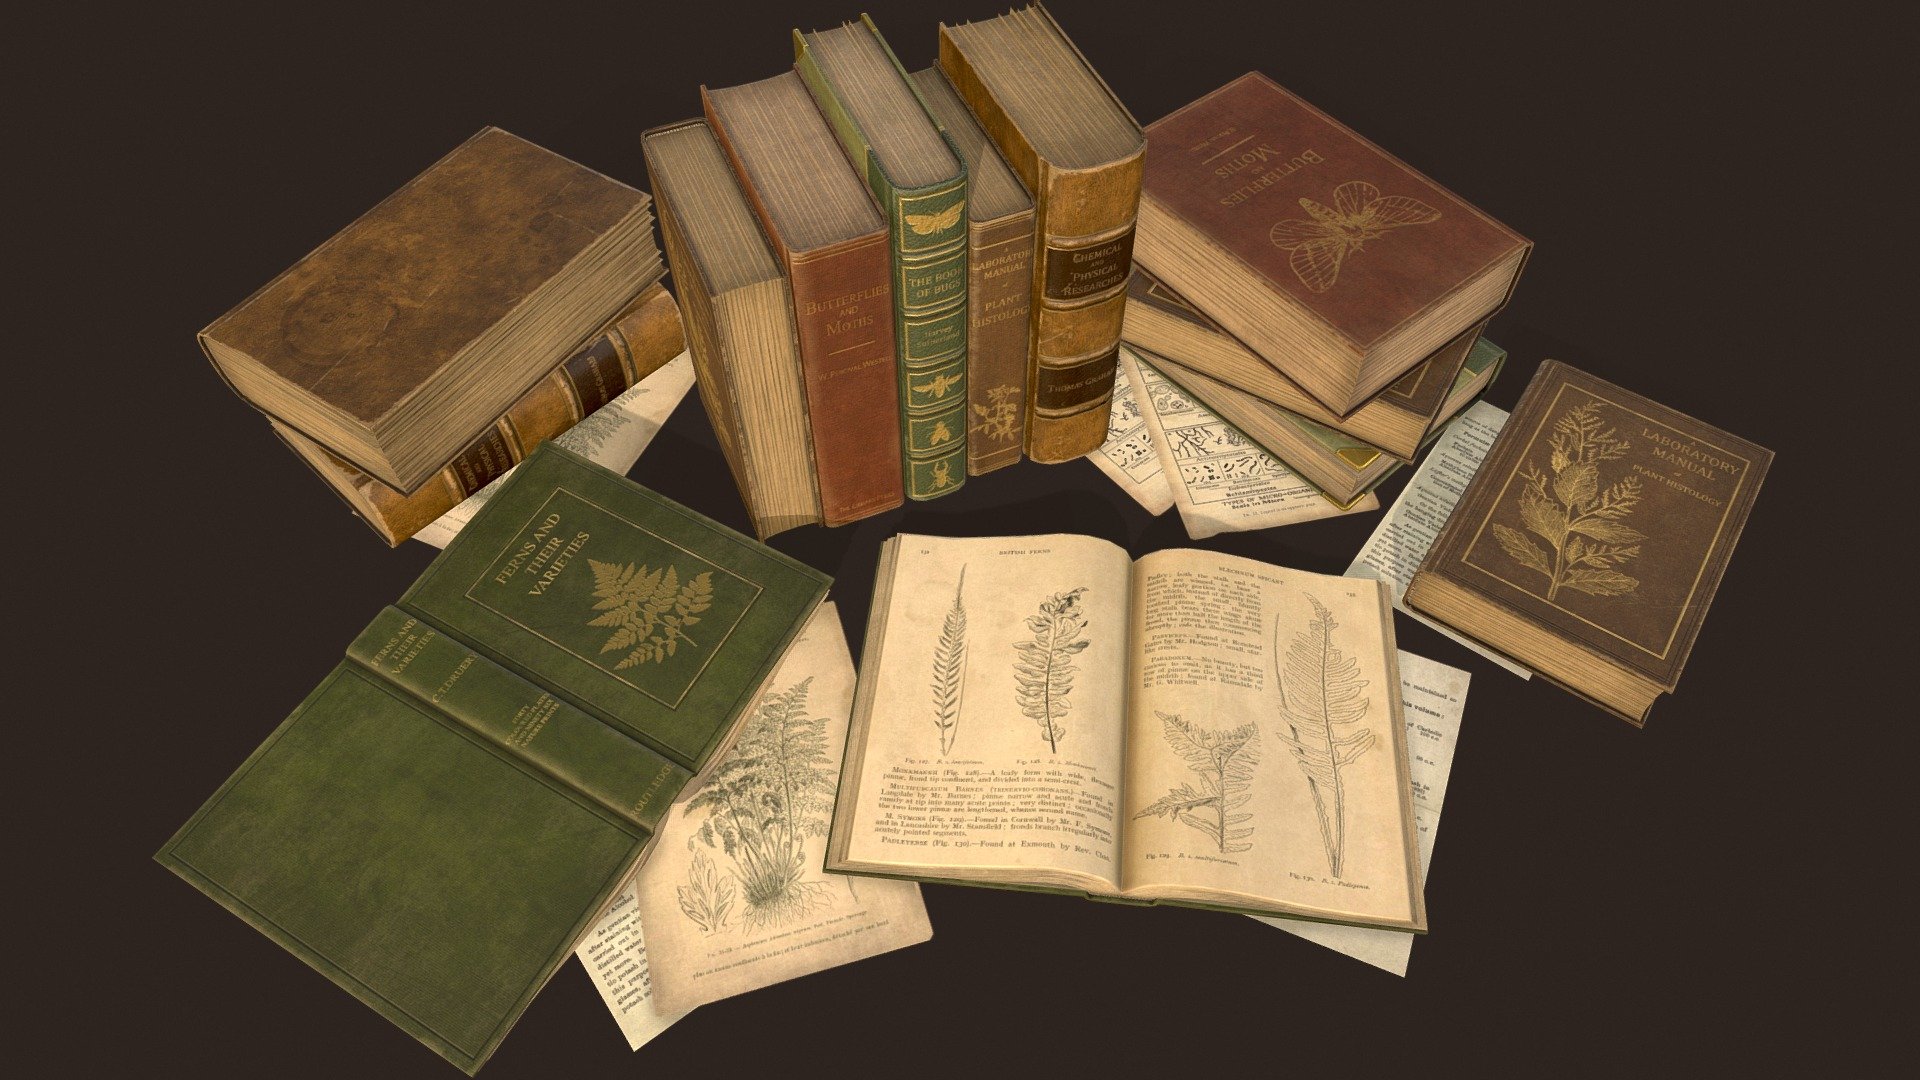 Old Books set it's a lowpoly game ready set of books with unwrapped UVs and PBR textures.

This set includes 5 different books (4 closed books and 1 open book) and 3 book pages. 

UVs: channel 1: overlapping; channel 2: non-overlapping (for baking lightmaps).

Formats: FBX, Obj. Marmoset Toolbag scene 3.08 (.tbscene) Textures format: TGA. Textures resolution: 2048x2048px.

Textures set includes:




Metal_Roughness: BaseColor, Roughness, Metallic, Normal, Height, AO.

Unity 5 (Standart Metallic): AlbedoTransparency, AO, Normal, MetallicSmoothness.

Unreal Engine 4: BaseColor, OcclusionRoughnessMetallic, Normal.



Artstation: https://www.artstation.com/tatianagladkaya

Instagram: https://www.instagram.com/t.gladkaya_ - Old Books Set - 3D model by Tatiana Gladkaya (@tatiana_gladkaya) 3d model